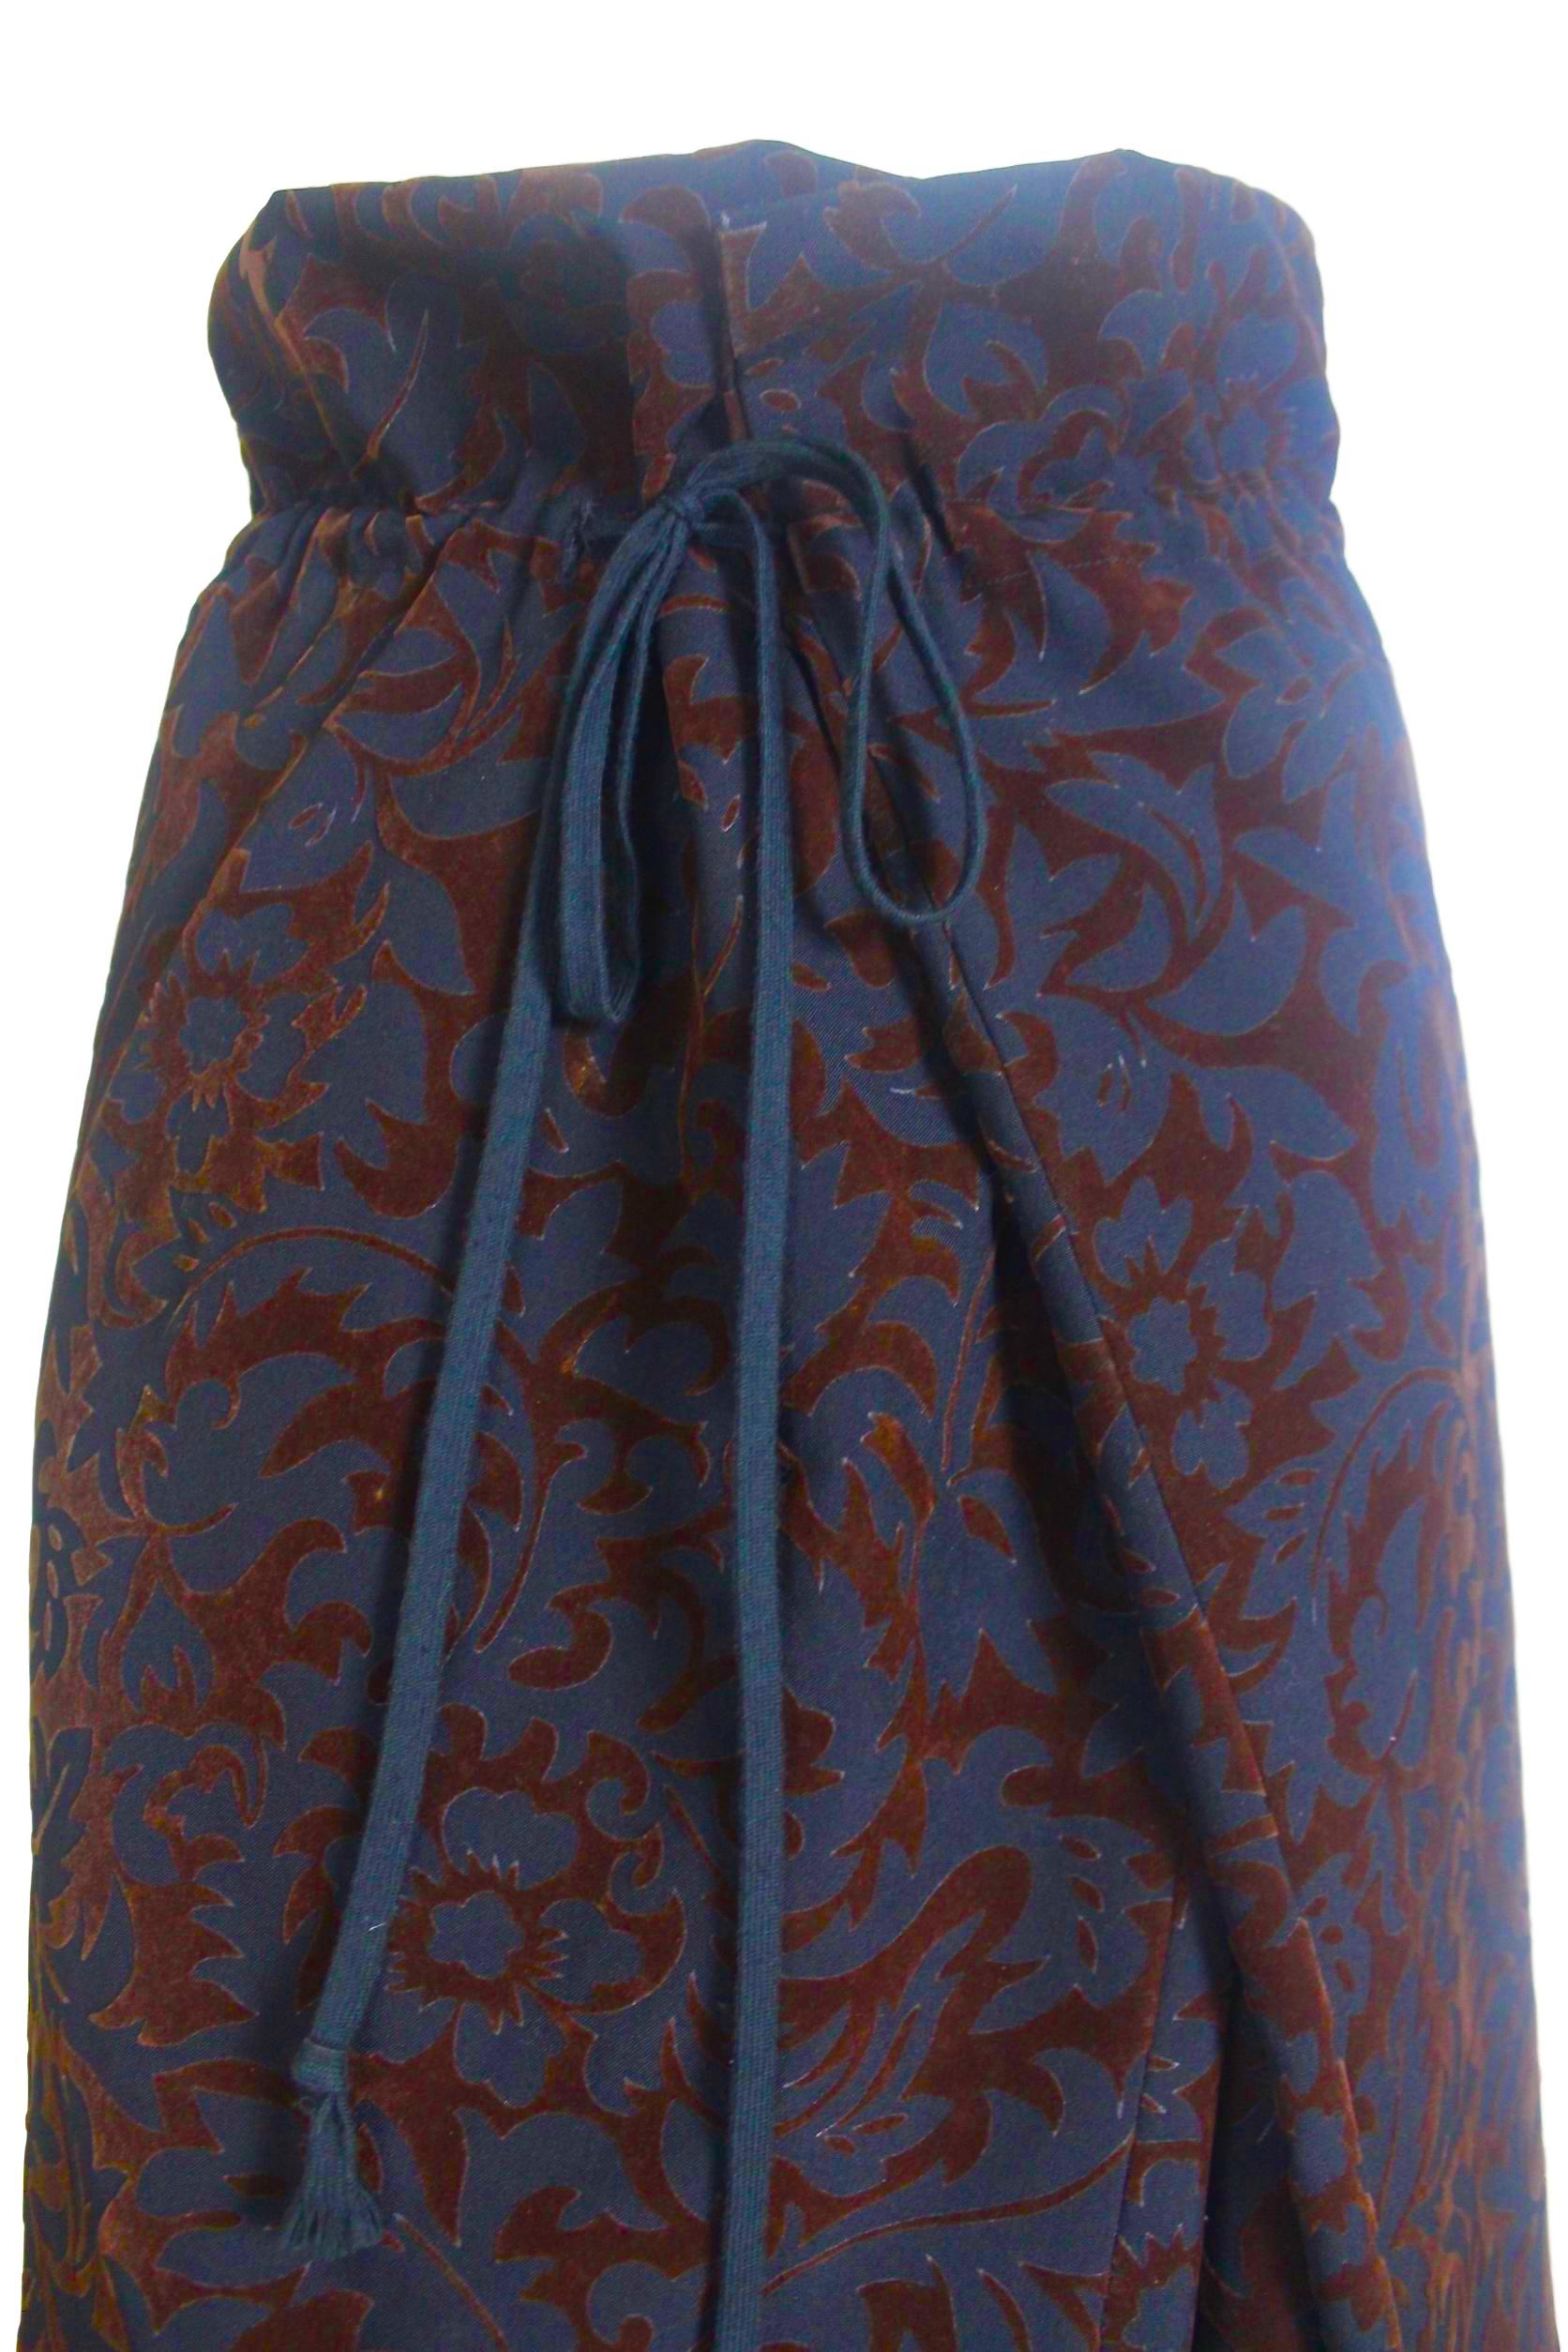 Comme des Garcons Flat Envelope Wool Skirt AD 1996 In Good Condition For Sale In Bath, GB